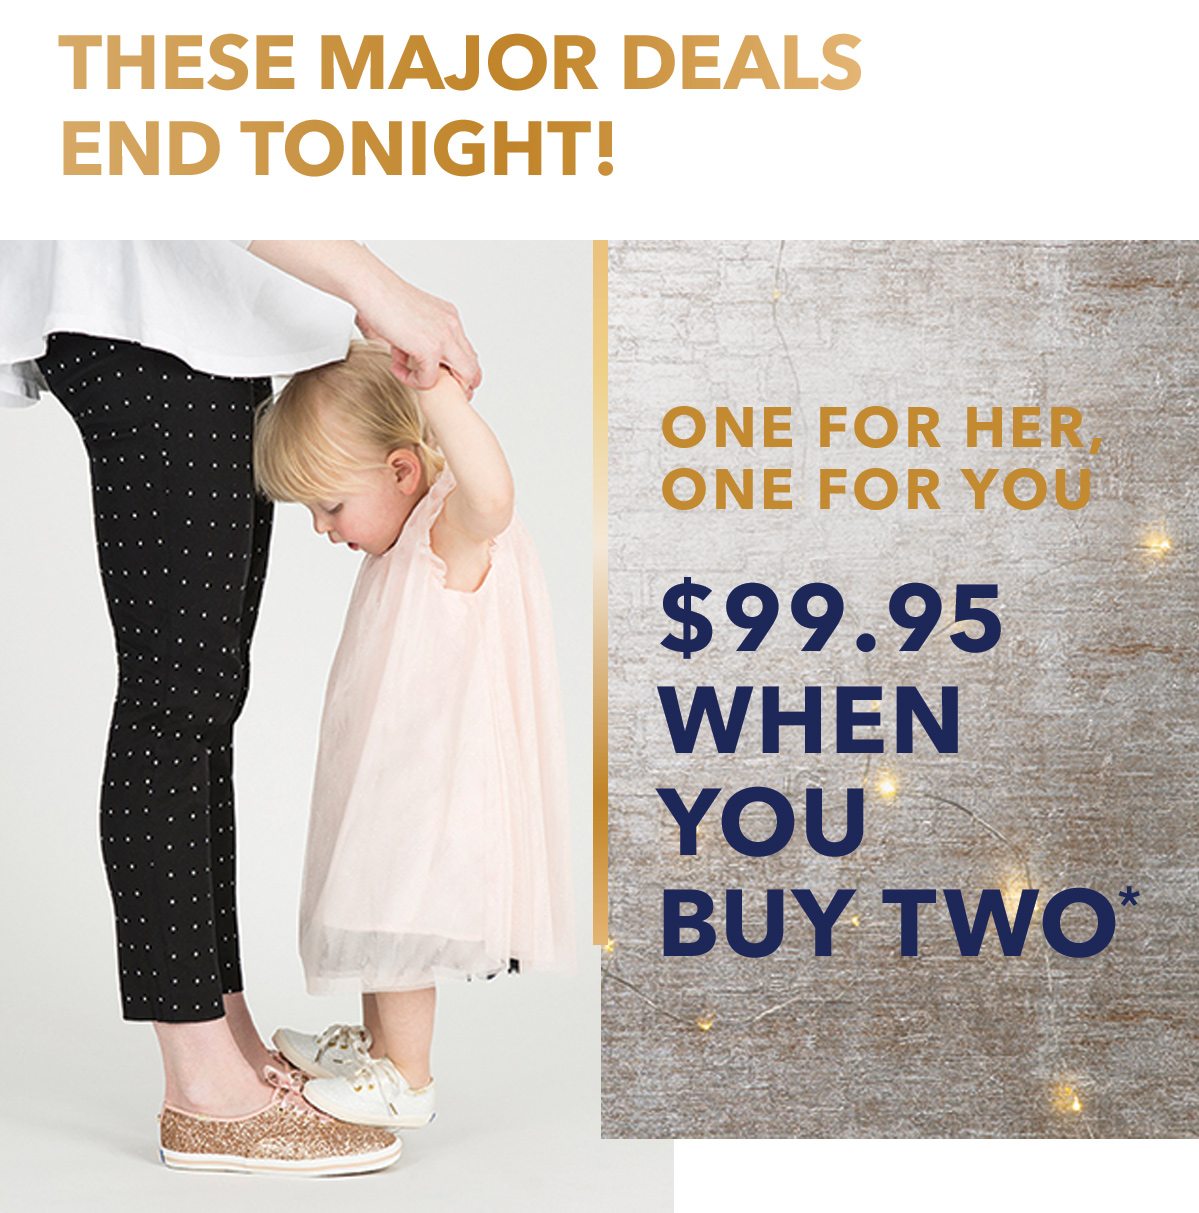 These Major Deals End Tonight! One For Her, One For You $99.95 When You Buy Two*